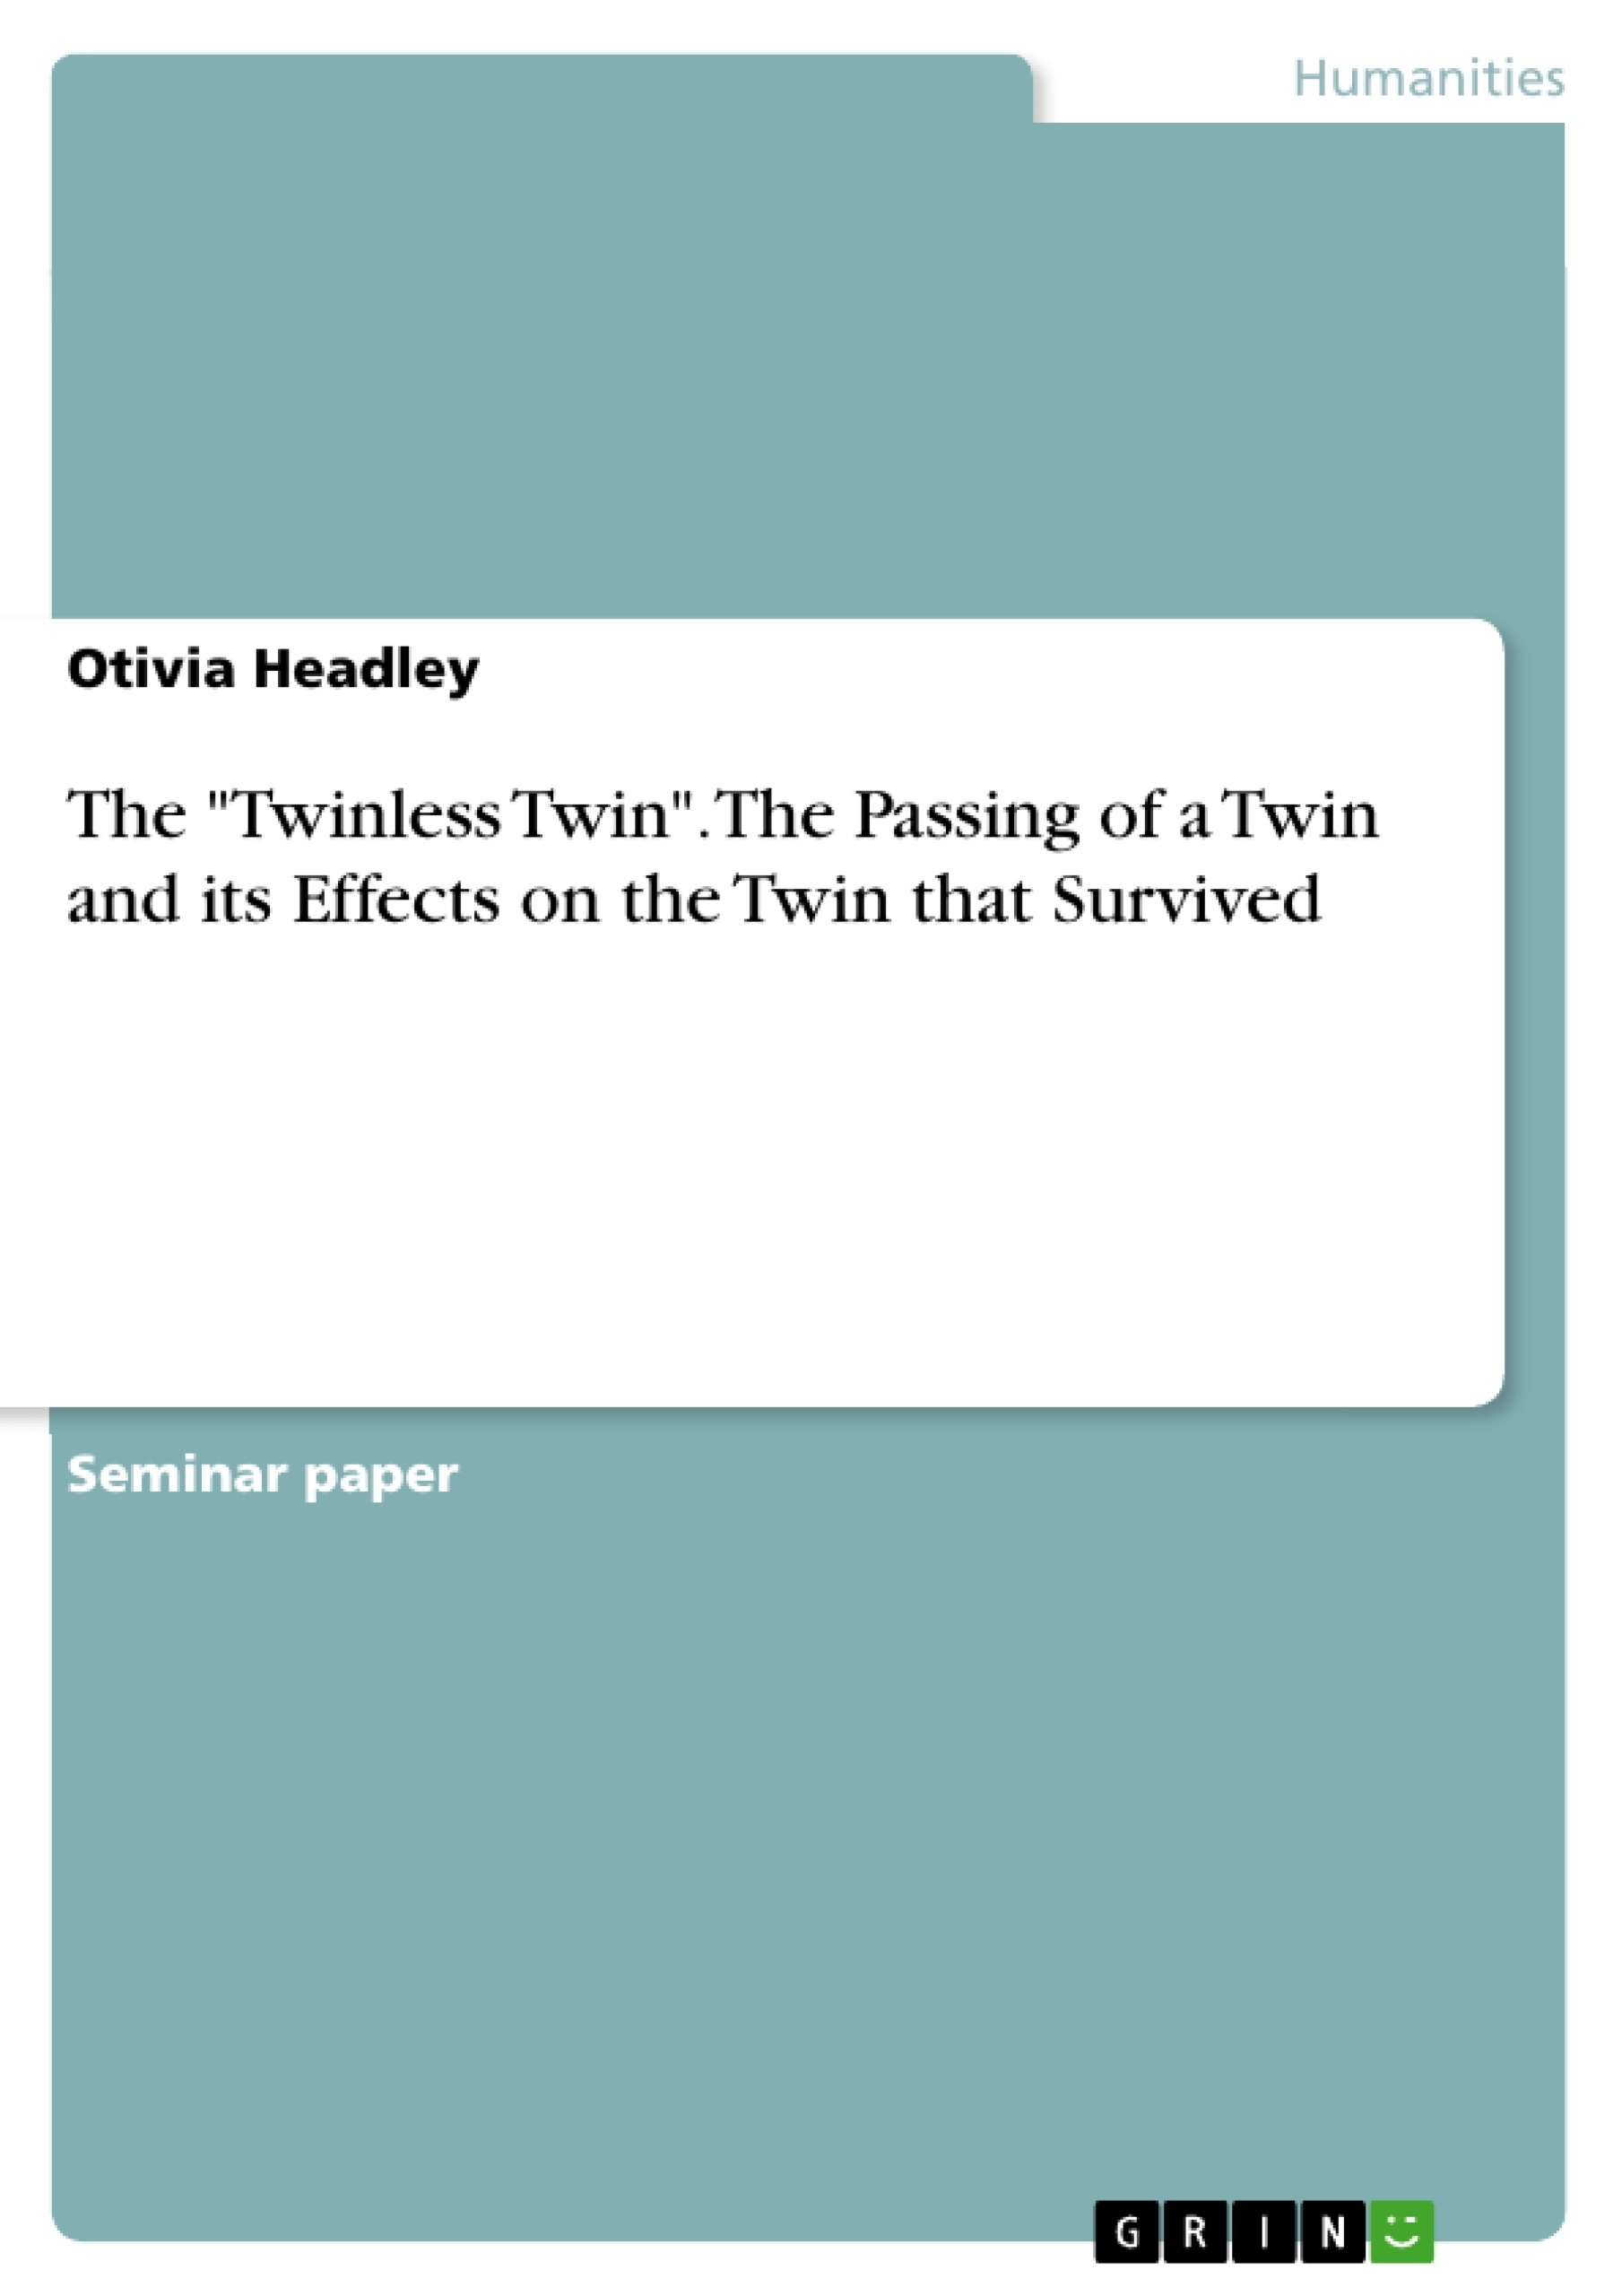 Titel: The "Twinless Twin". The Passing of a Twin and its Effects on the Twin that Survived